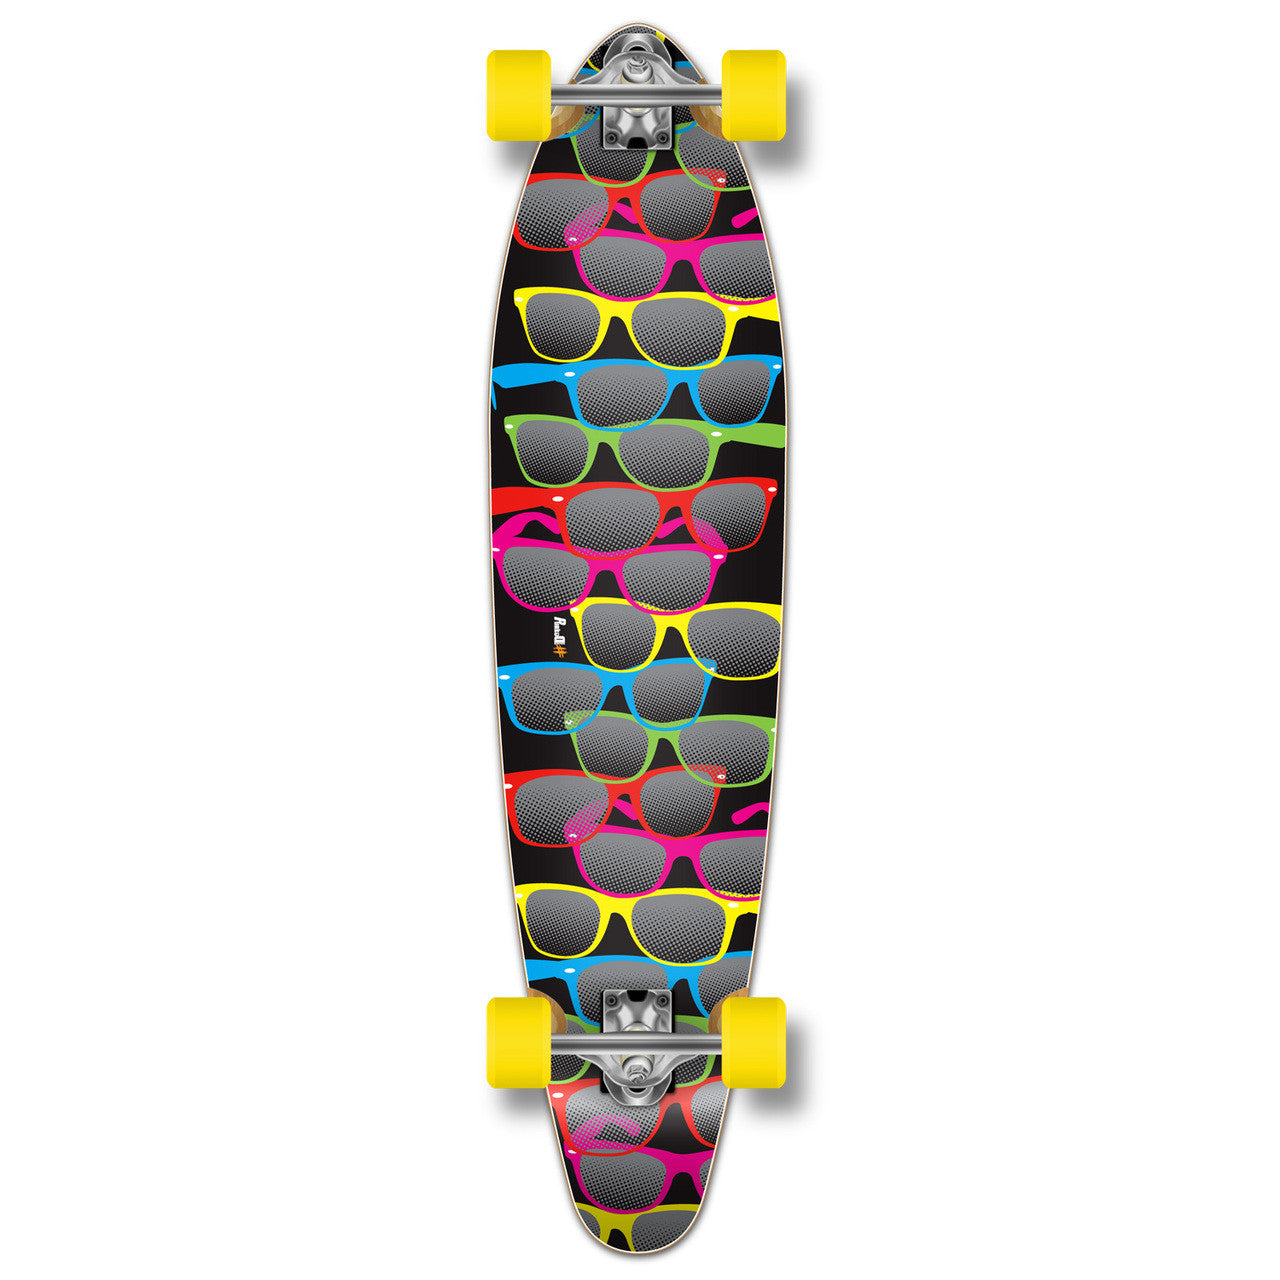 Yocaher Kicktail Longboard Complete - Shades Black